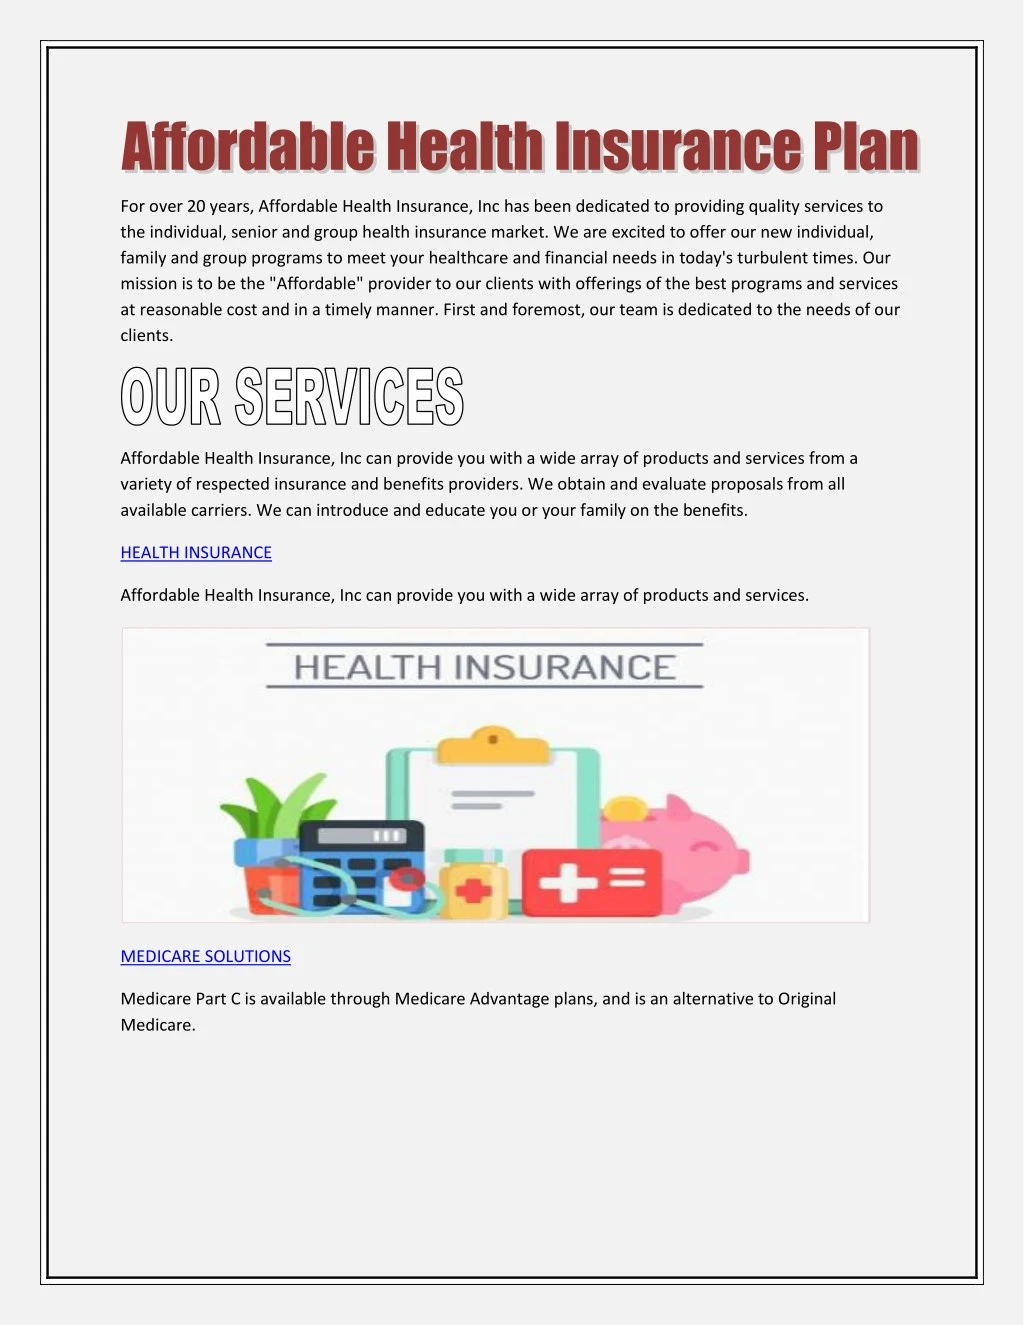 for over 20 years affordable health insurance